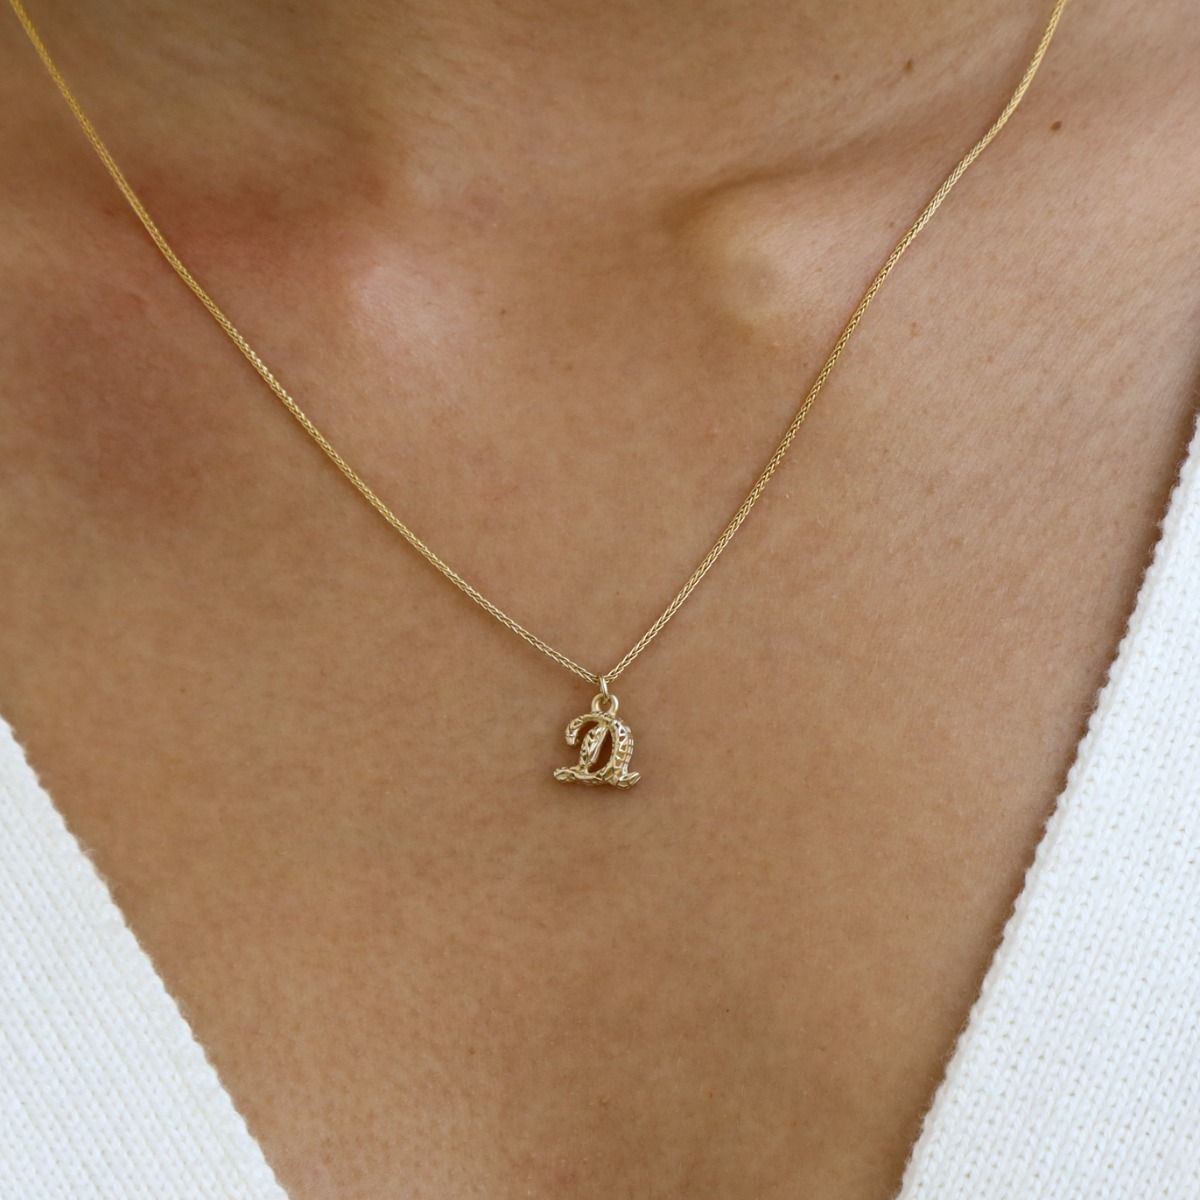 Gold Vermeil Monogram Necklace | Monogrammed Gold Jewelry for Her